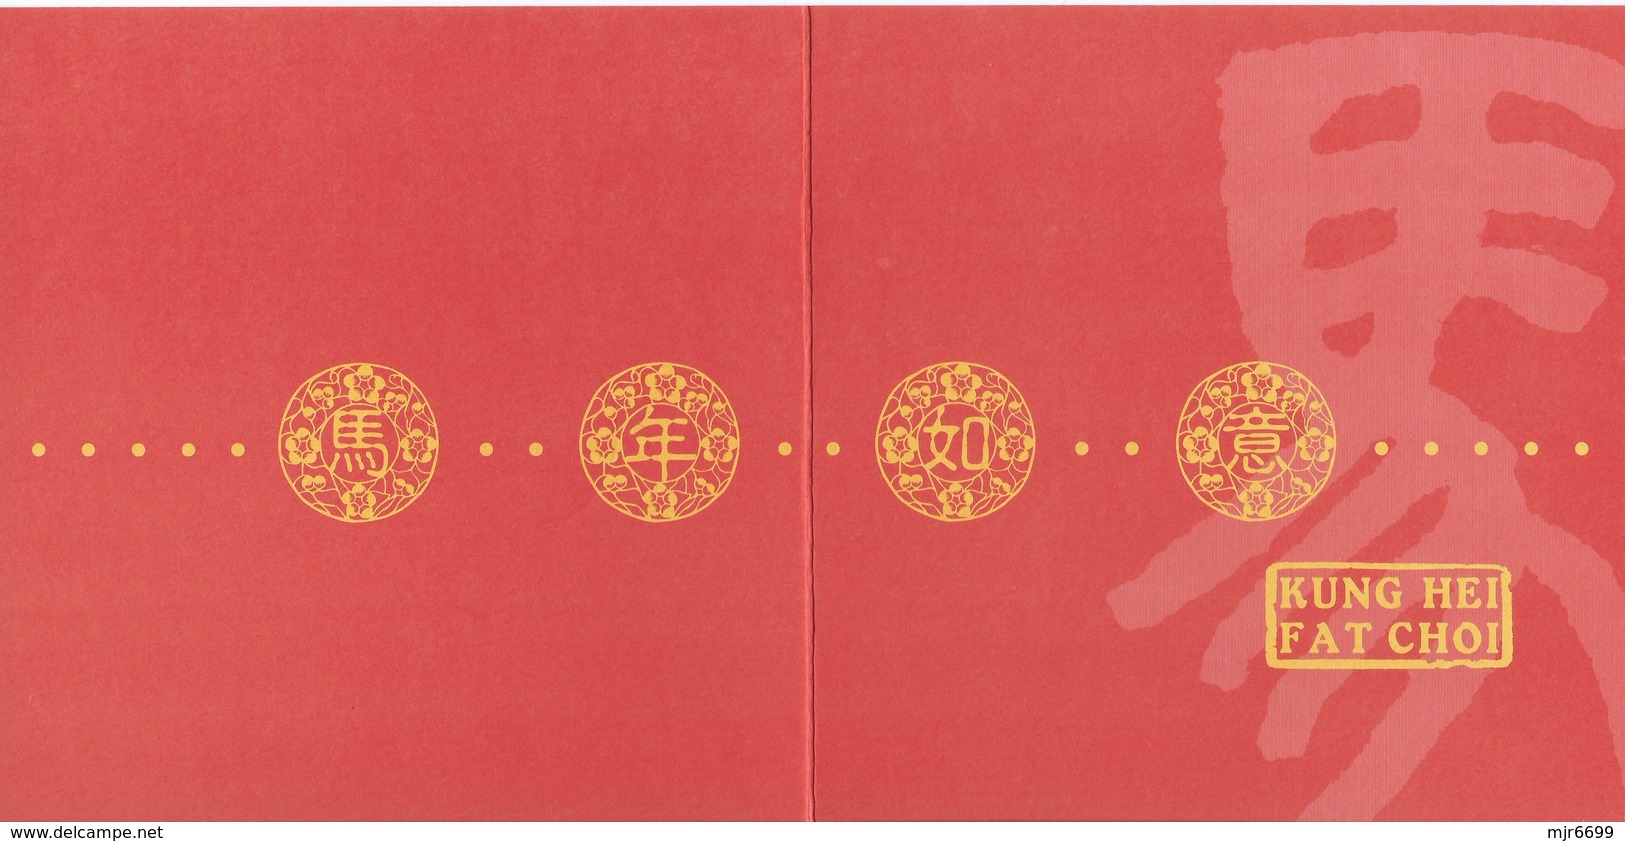 MACAU 2002 LUNAR NEW YEAR OF THE HORSE GREETING CARD & POSTAGE PAID COVER, LOCAL USAGE,  POST OFFICE CODE #BPD003 - Entiers Postaux